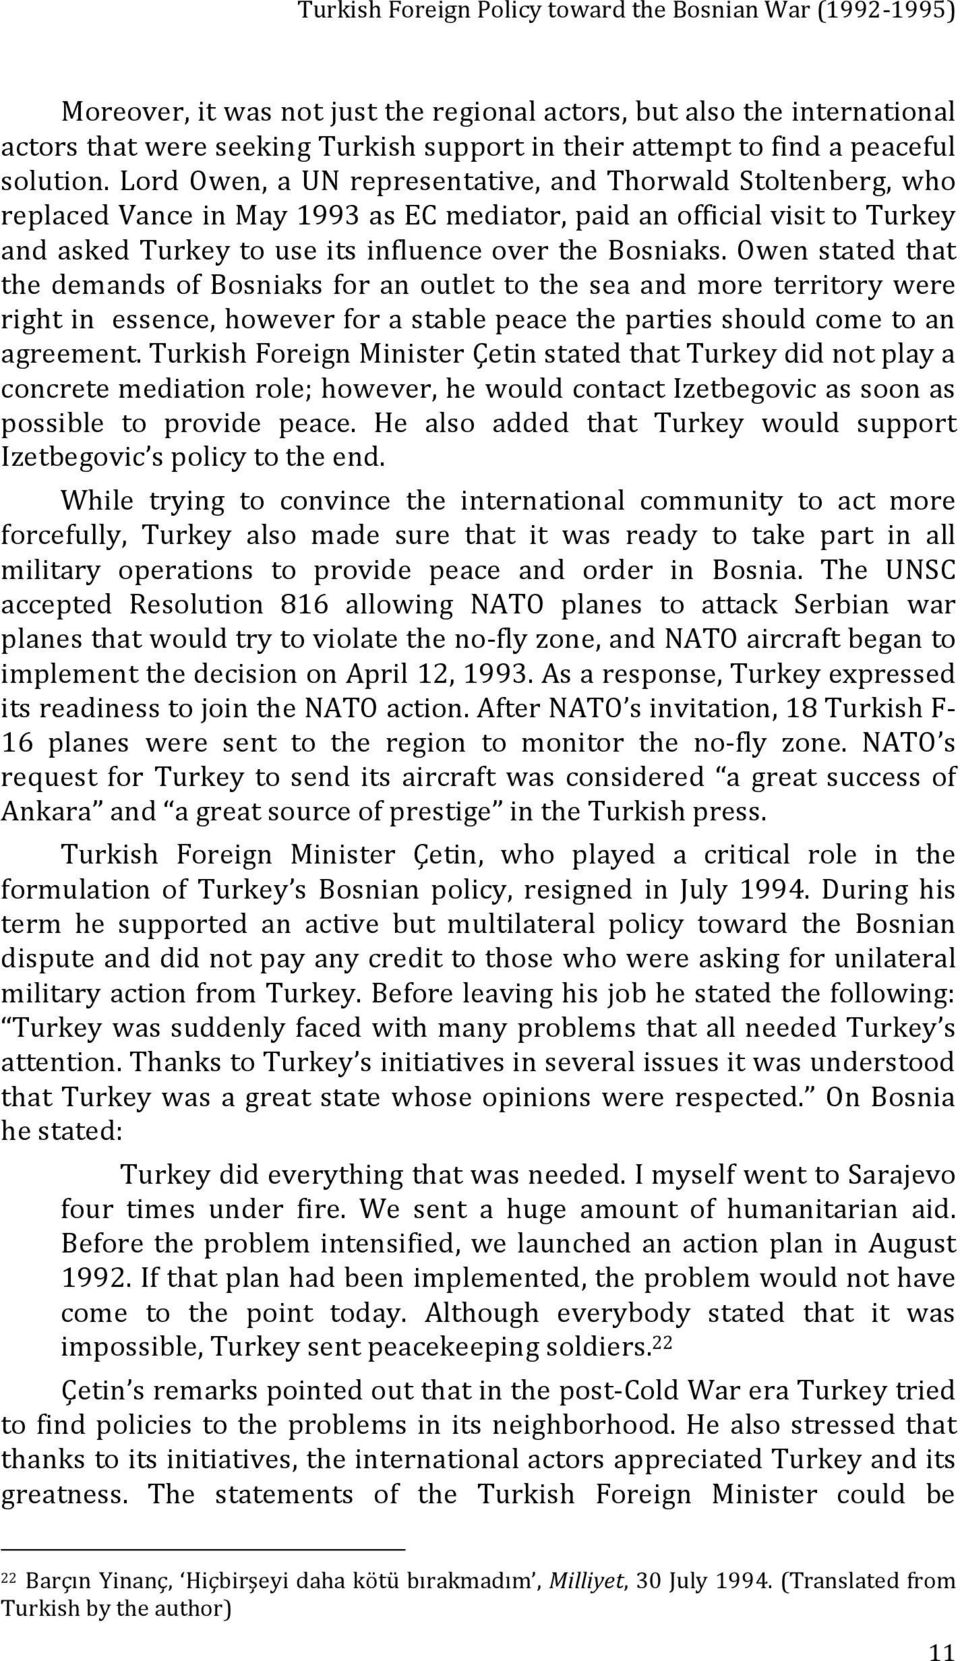 Lord Owen, a UN representative, and Thorwald Stoltenberg, who replaced Vance in May 1993 as EC mediator, paid an official visit to Turkey and asked Turkey to use its influence over the Bosniaks.